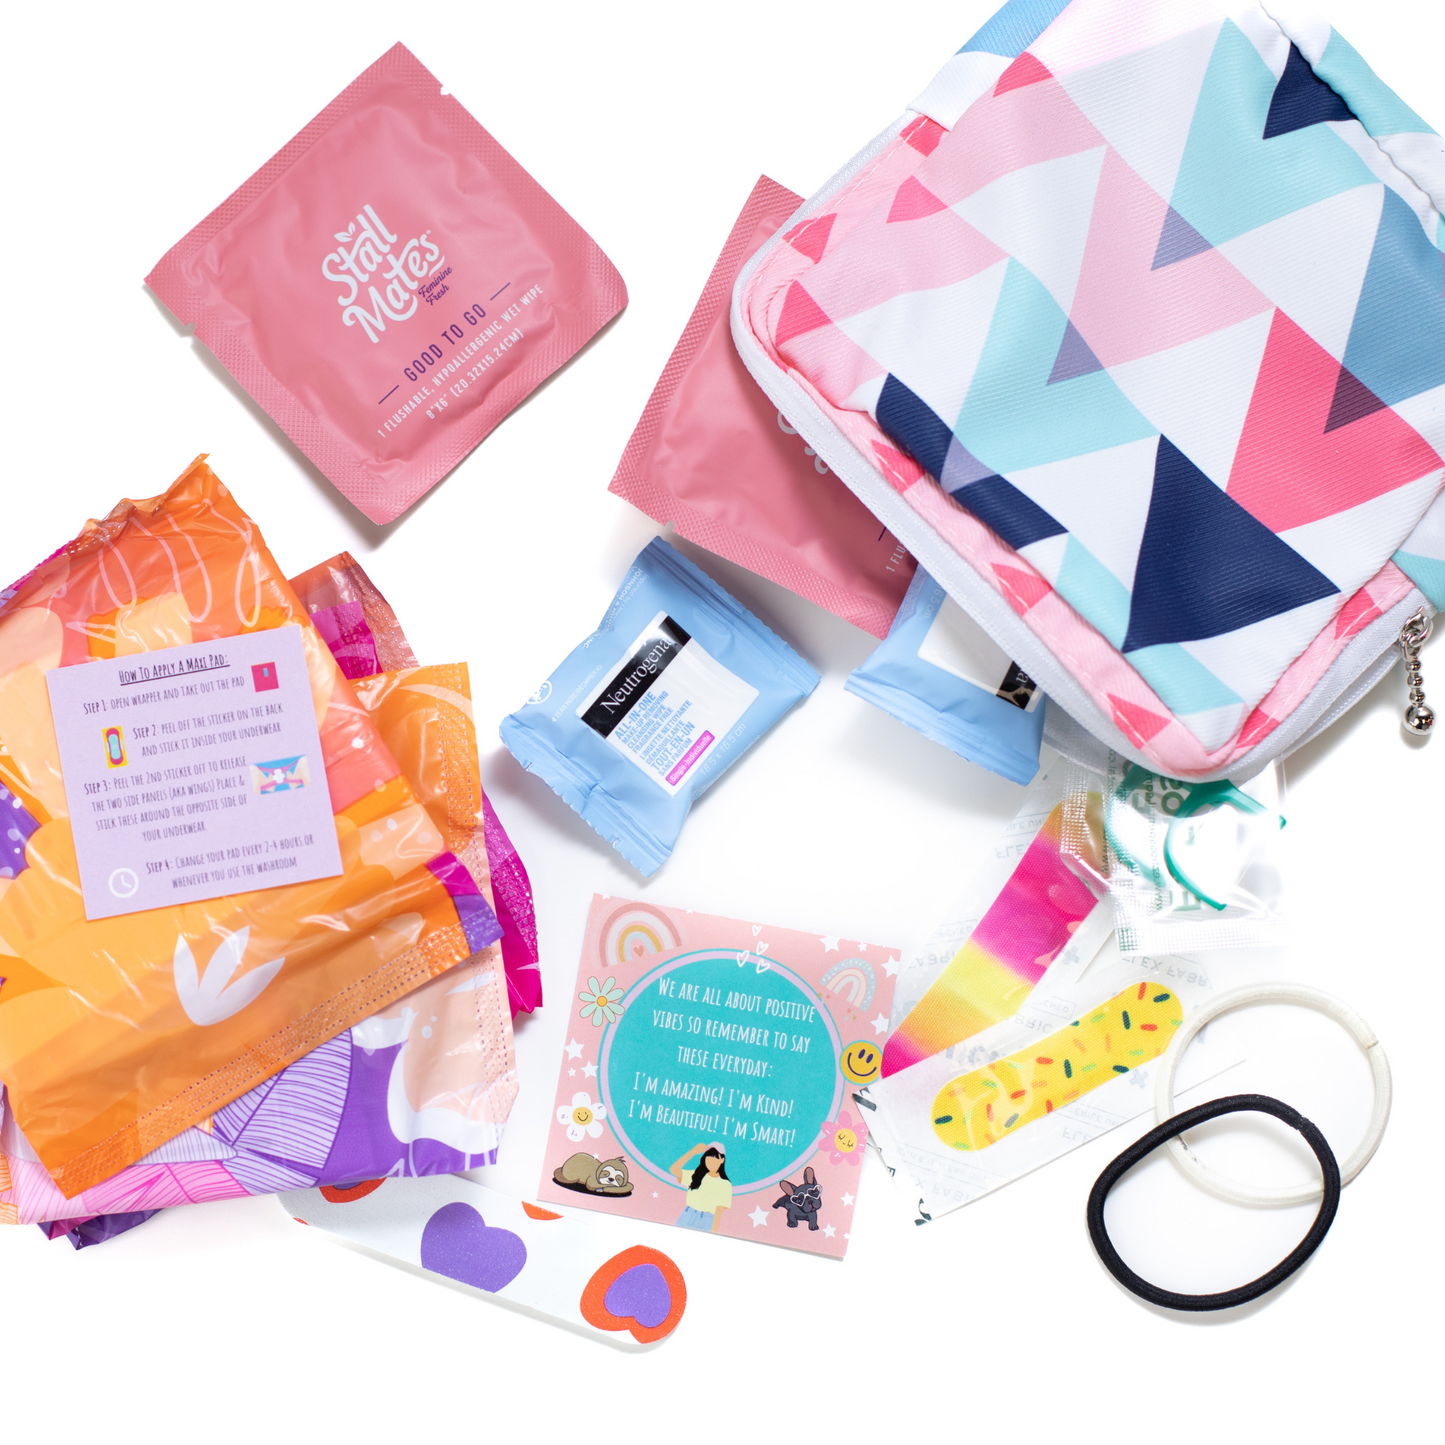 products inside the girl emergency kit